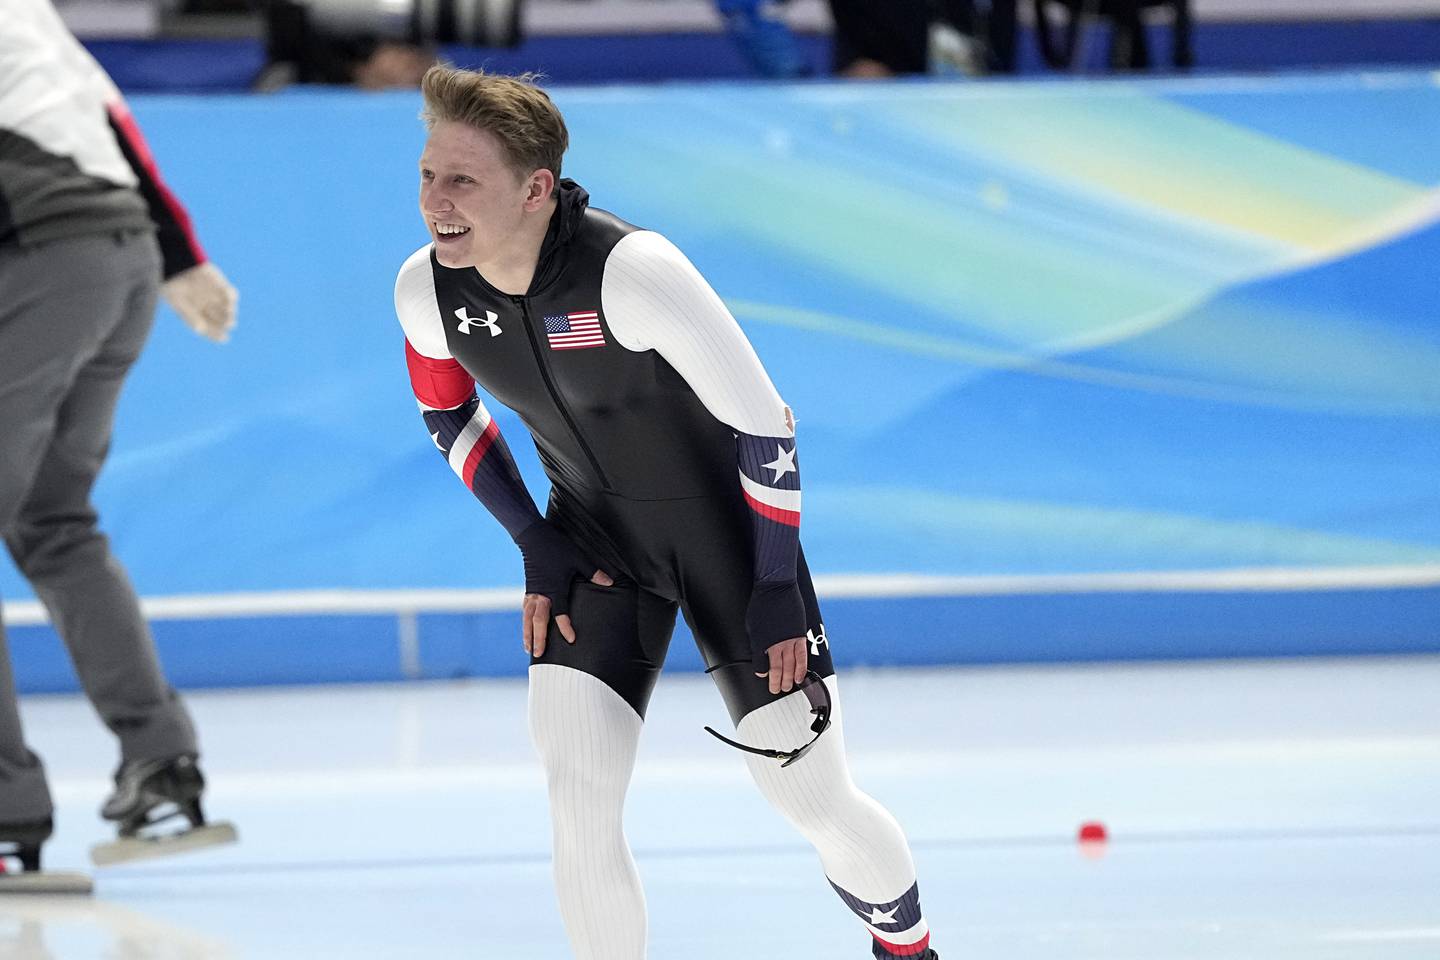 Austin Kleba of the United States reacts after falling during his heat in the men's speedskating 500-meter race at the 2022 Winter Olympics, Saturday, Feb. 12, 2022, in Beijing. (AP Photo/Ashley Landis)